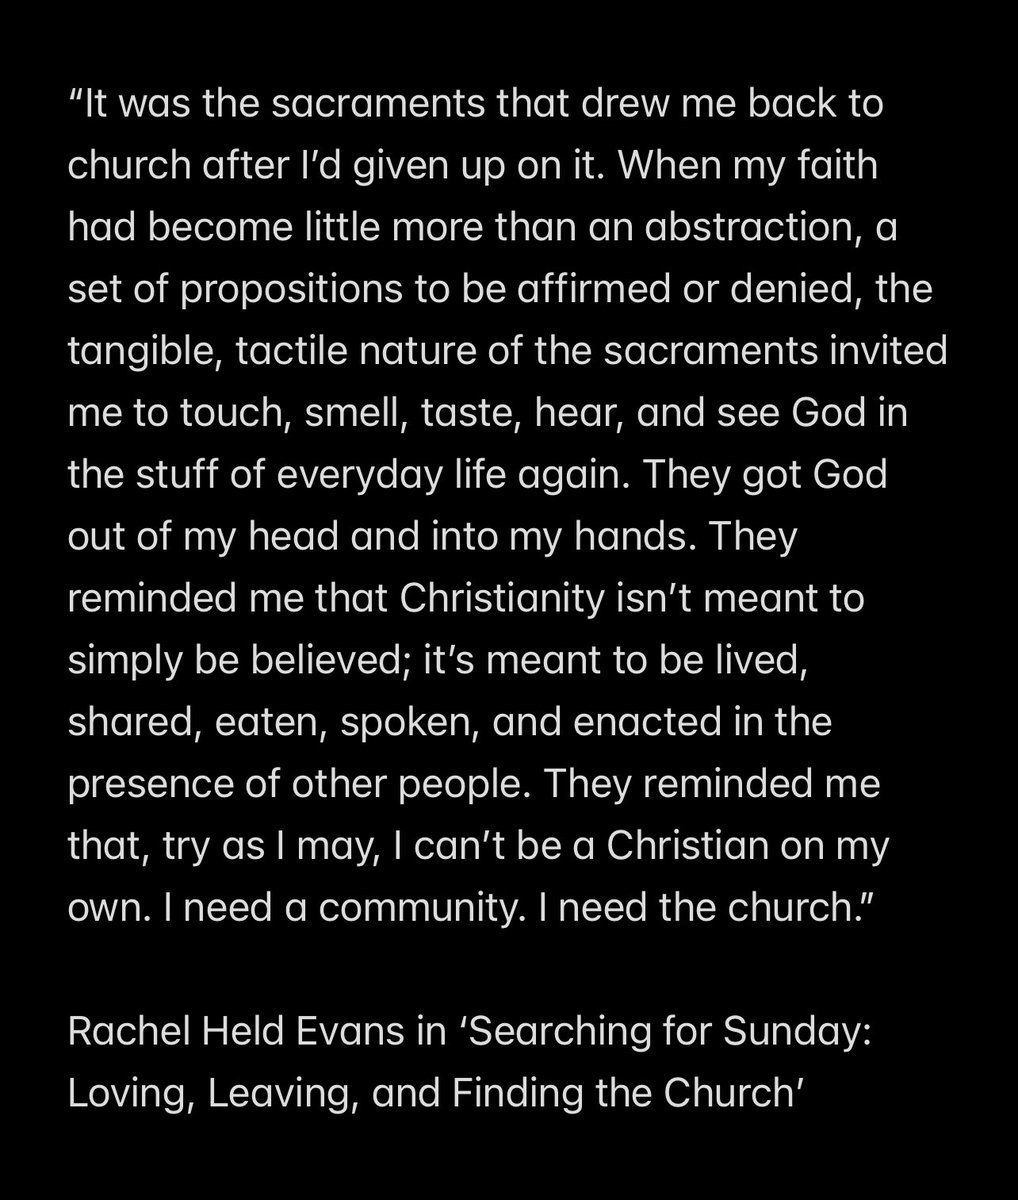 As someone moving more towards a sacramental Christian spirituality, I felt these words of Rachel Held Evans in my bones.